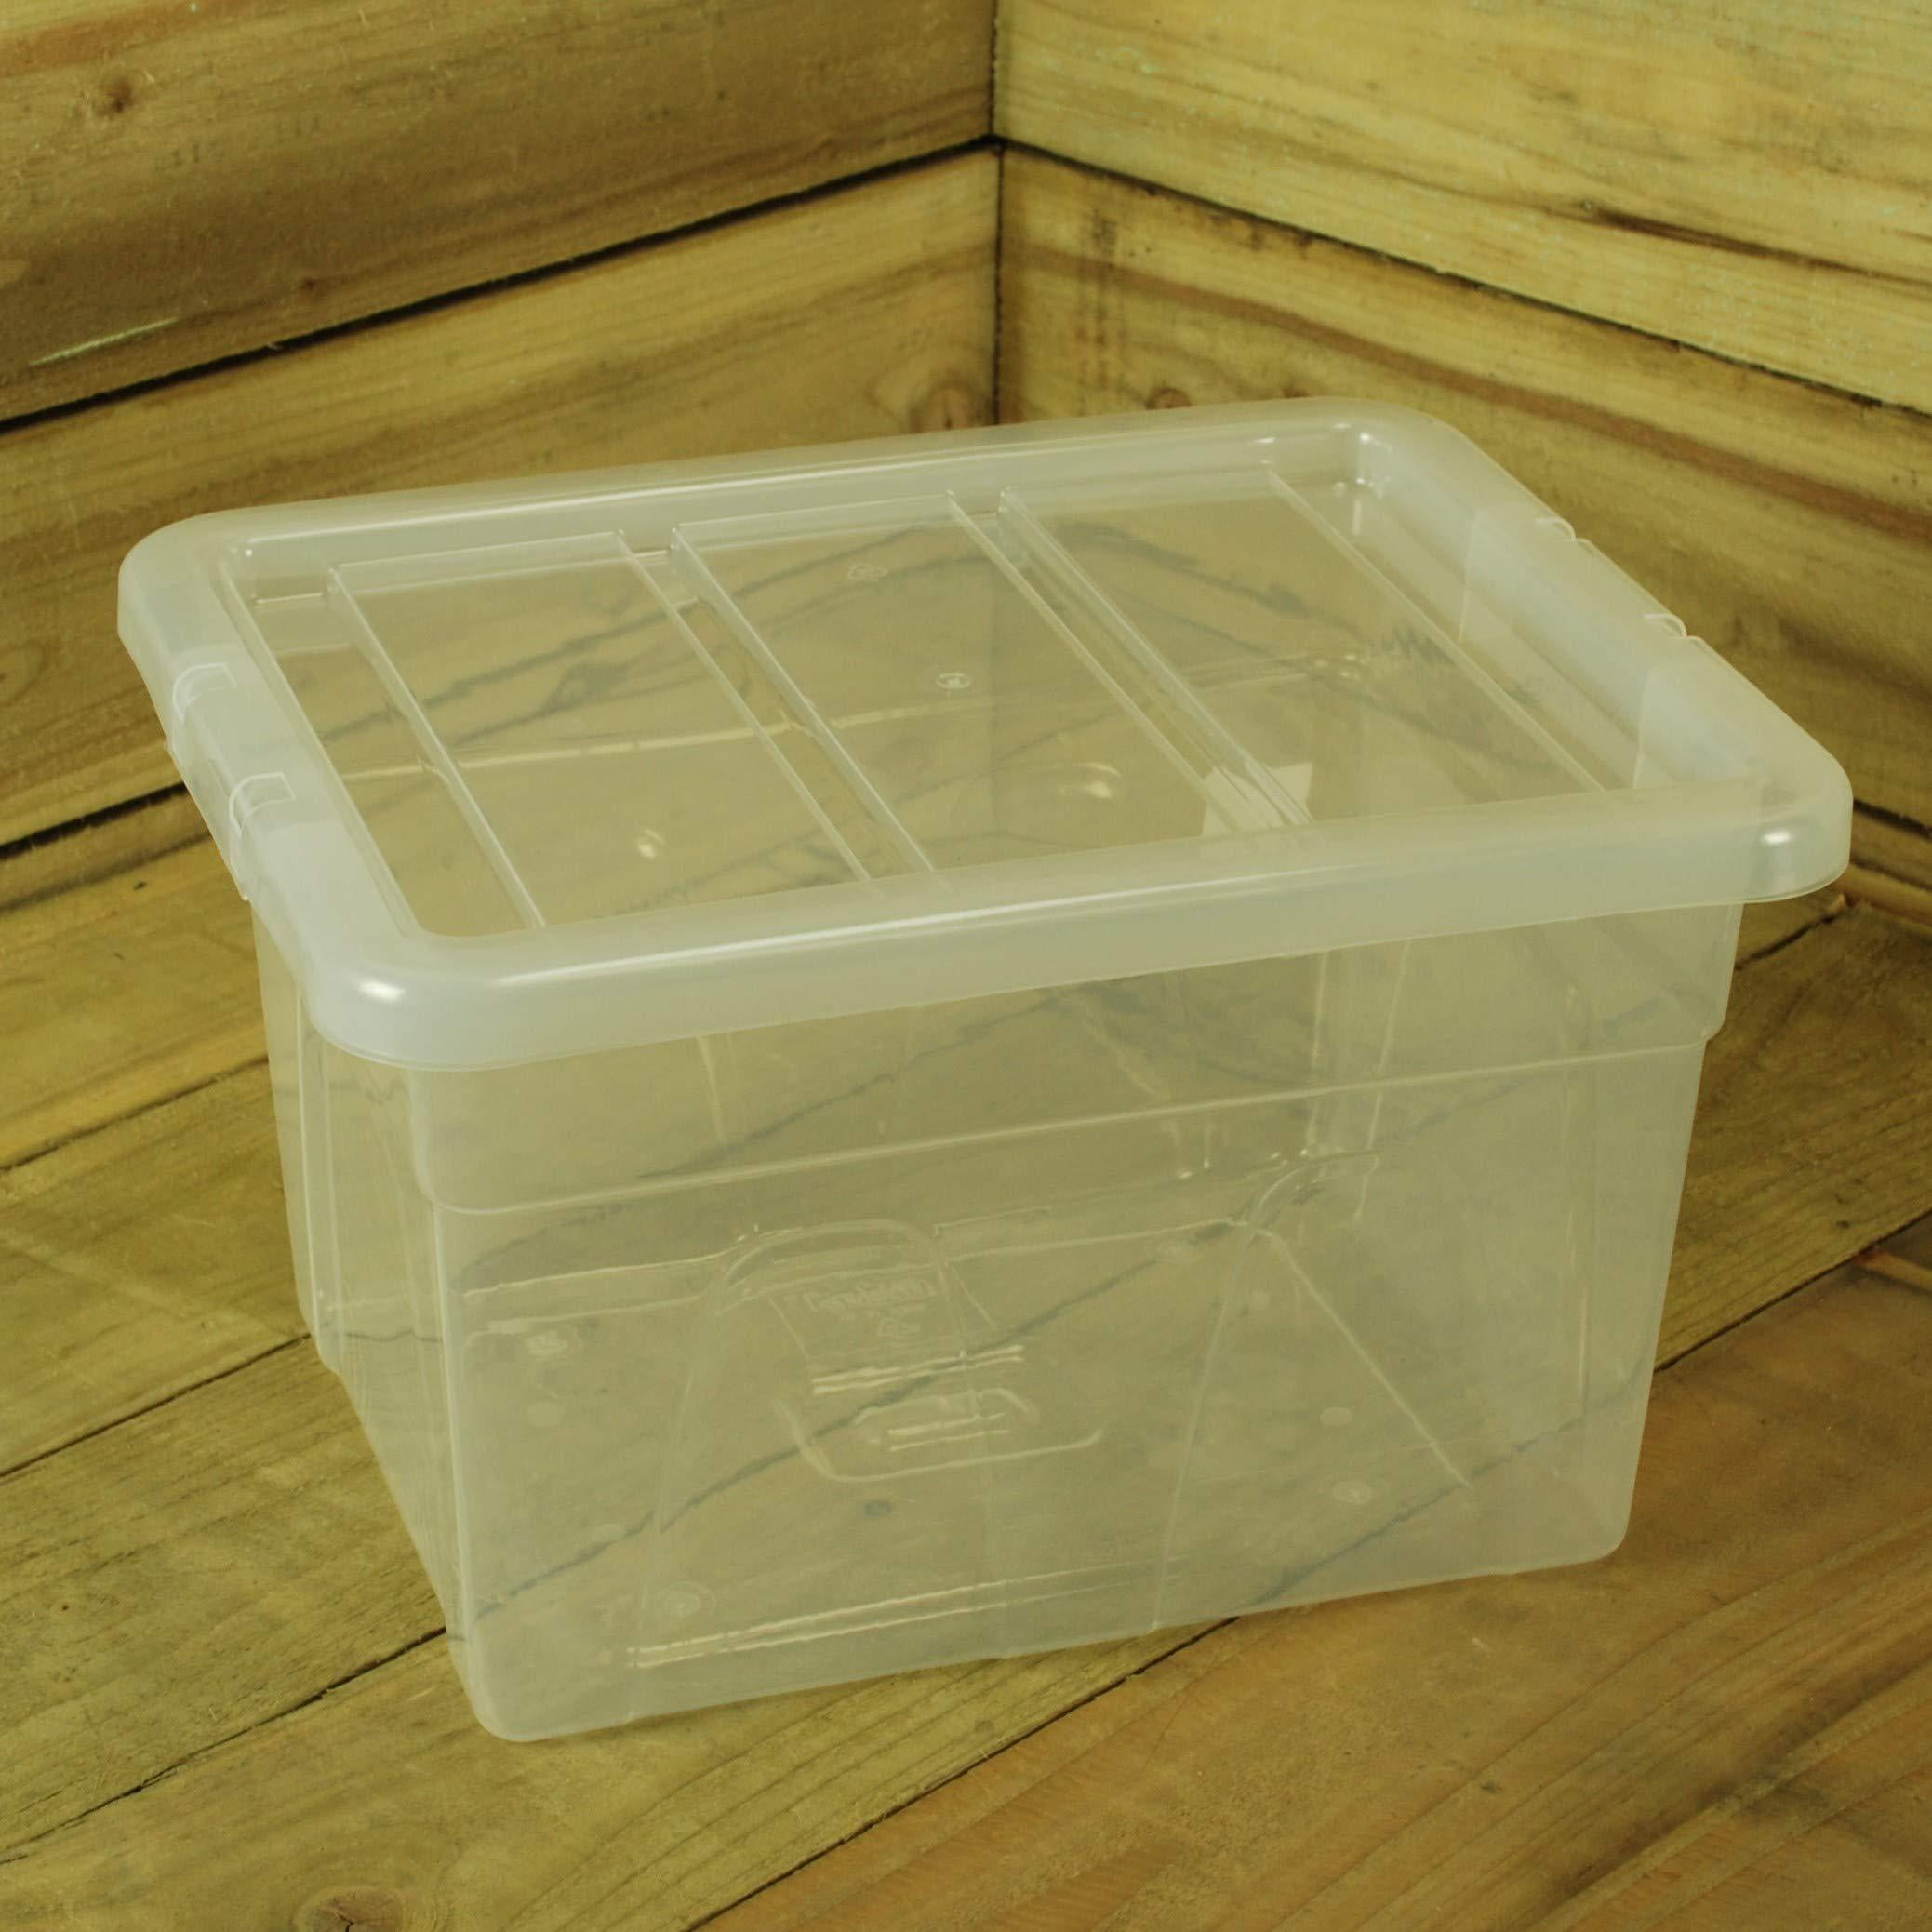 40 x 33 x 25 40cm Spacemaster Maxi Clear 20 Litre Storage Box with Lid 